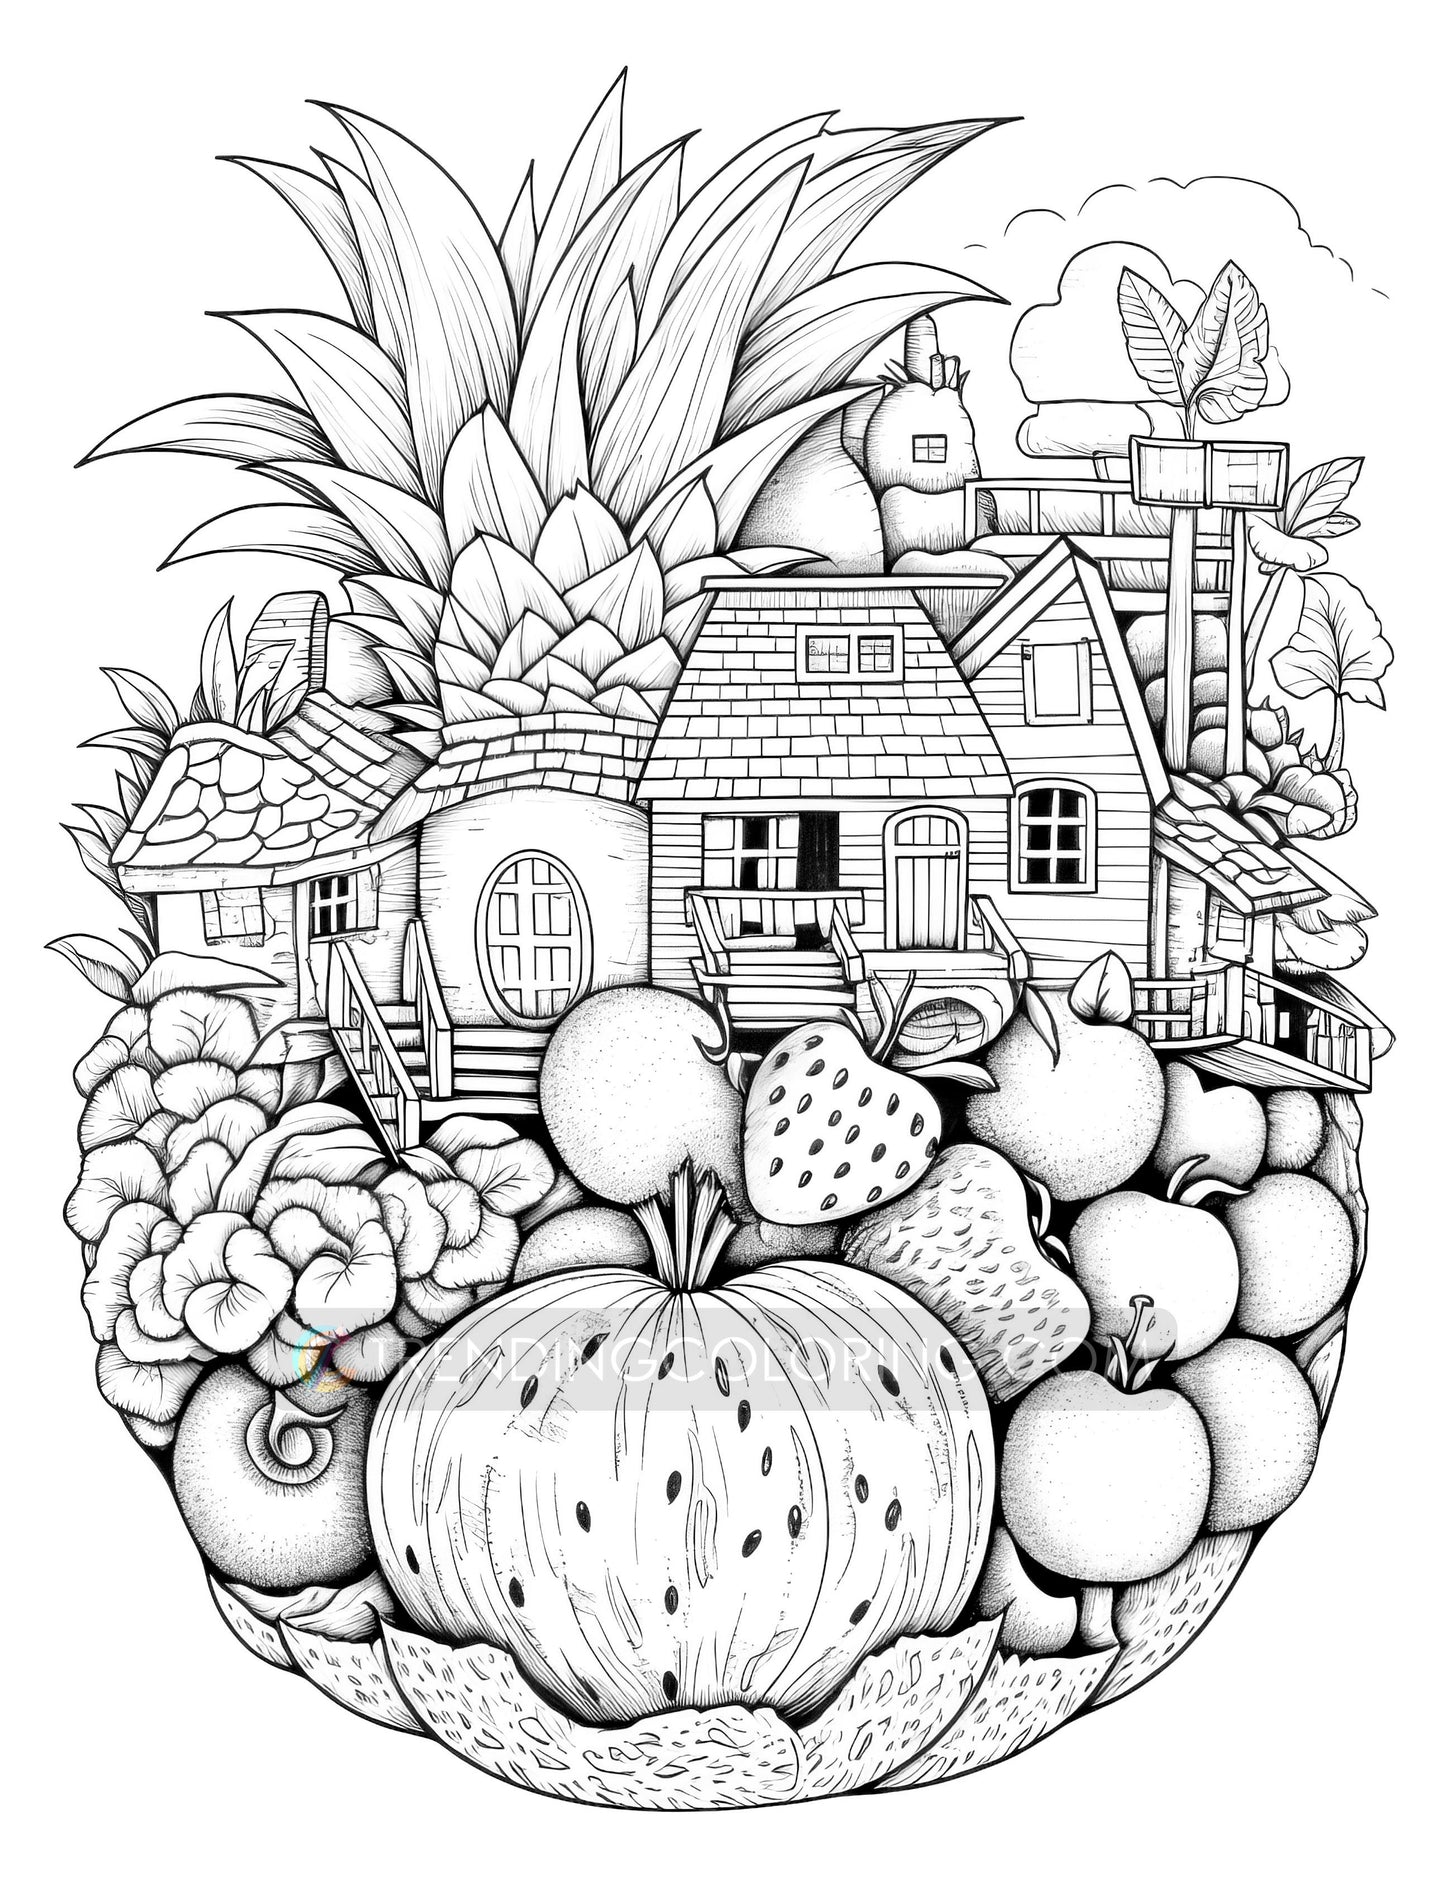 50 Fantasy Fruit House Coloring Pages - Instant Download - Printable PDF